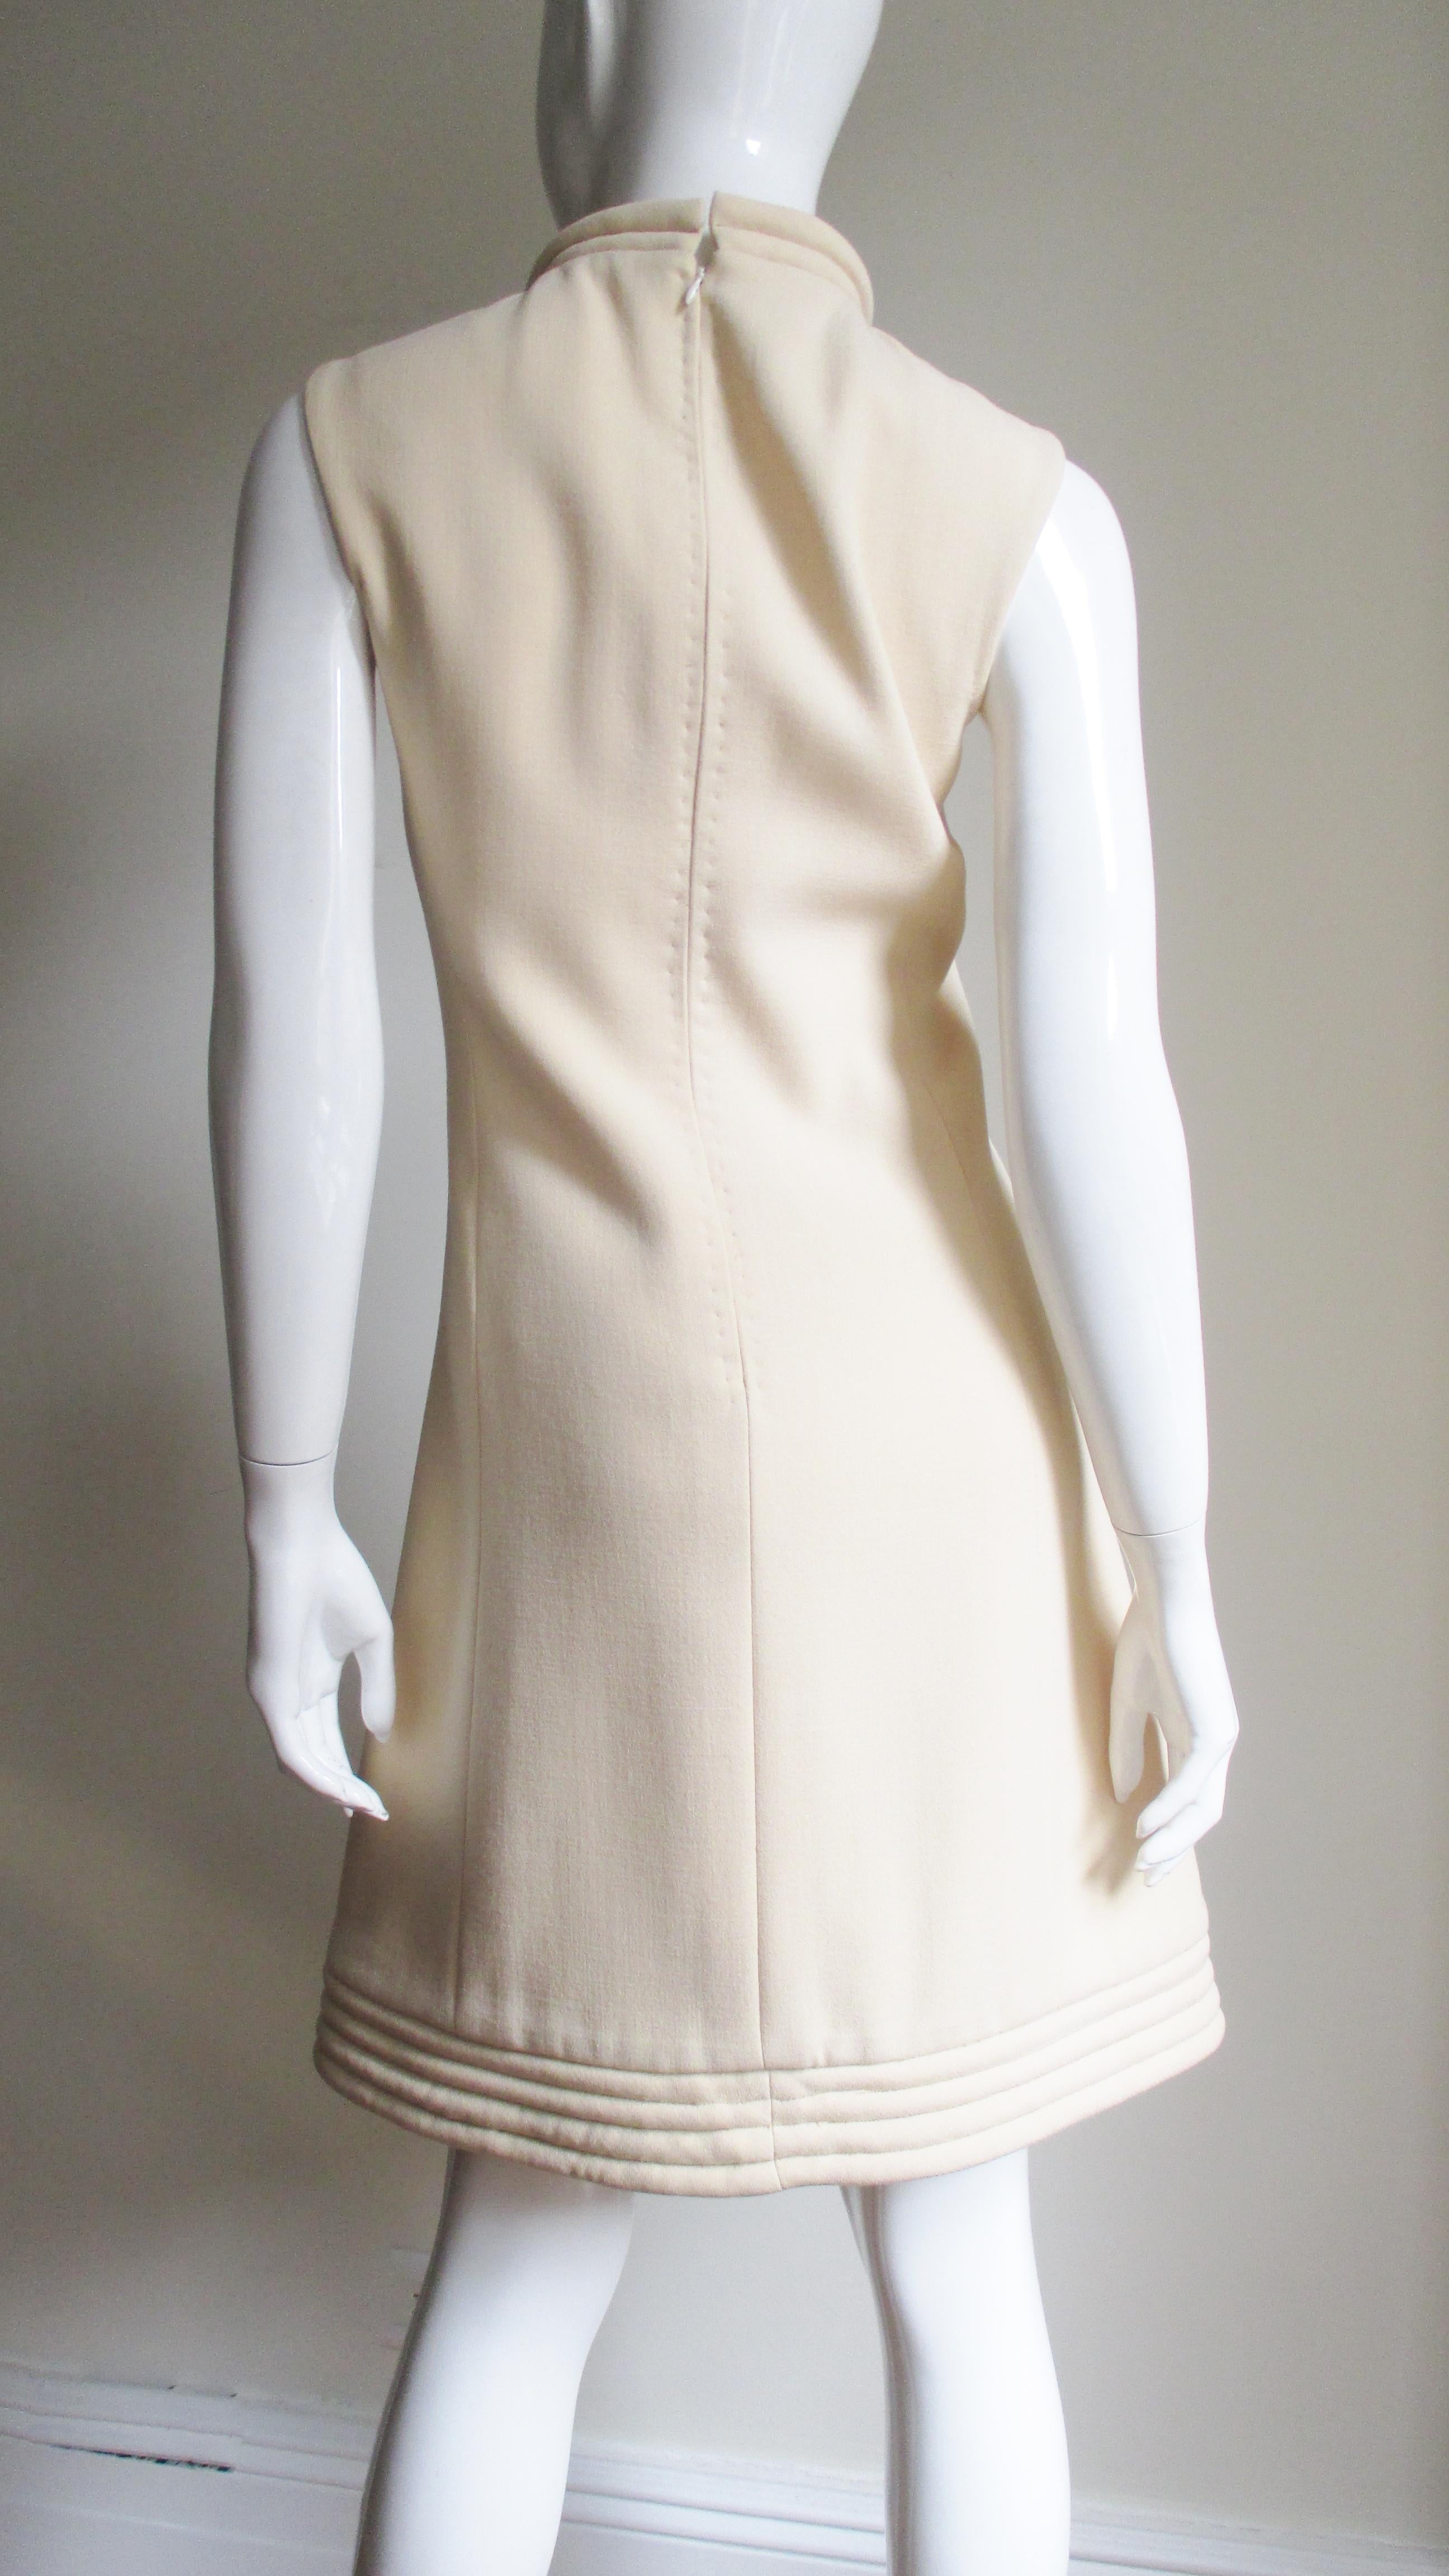 Pierre Cardin 1960s Space Age Dress In Good Condition For Sale In Water Mill, NY